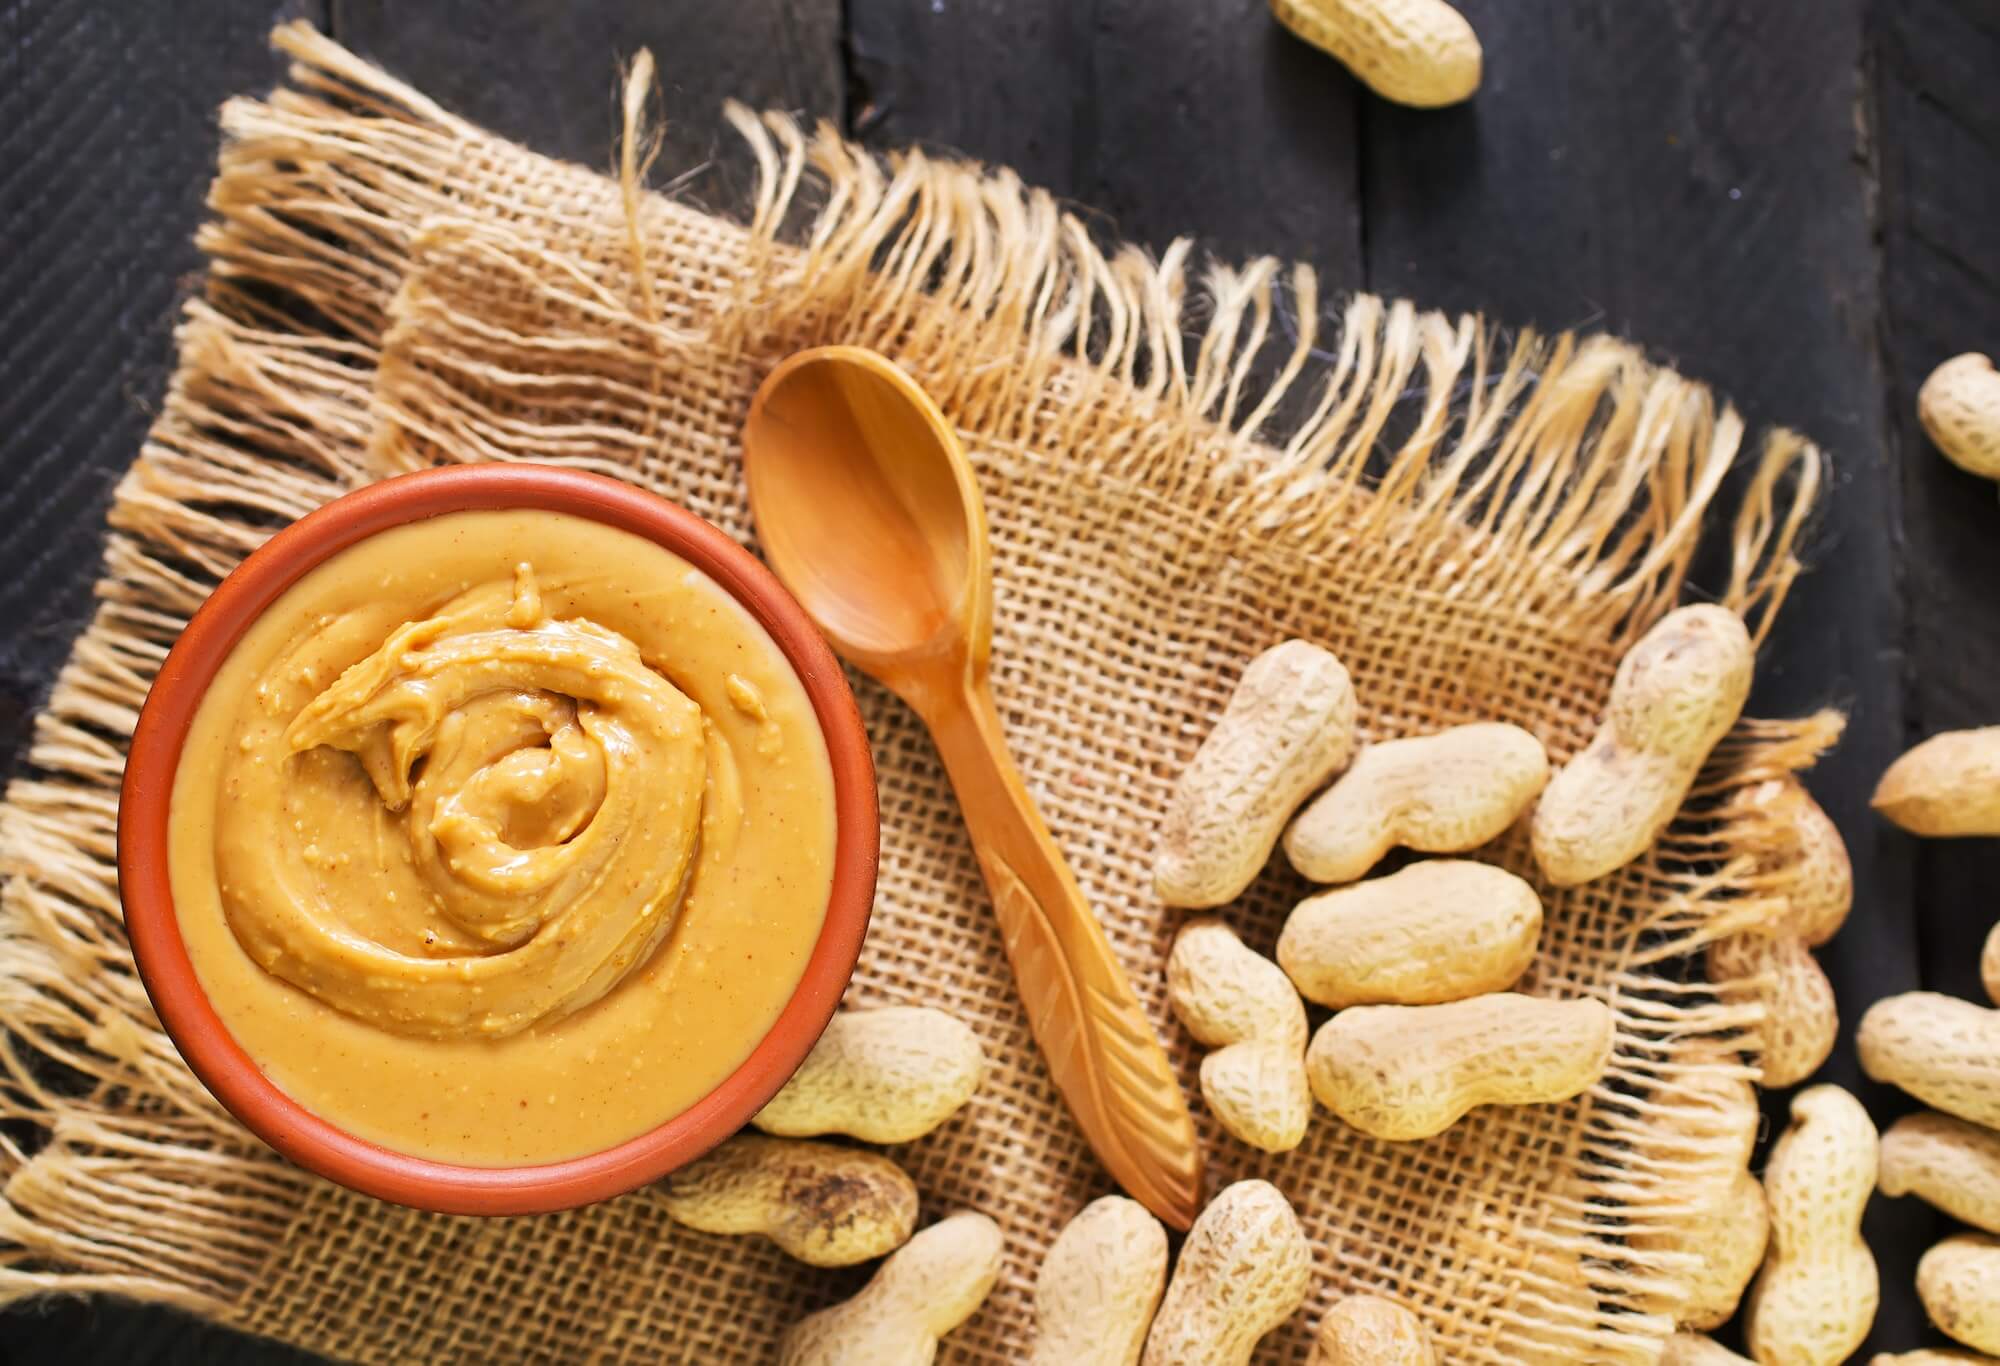 Nutritional Overview of Peanut Butter